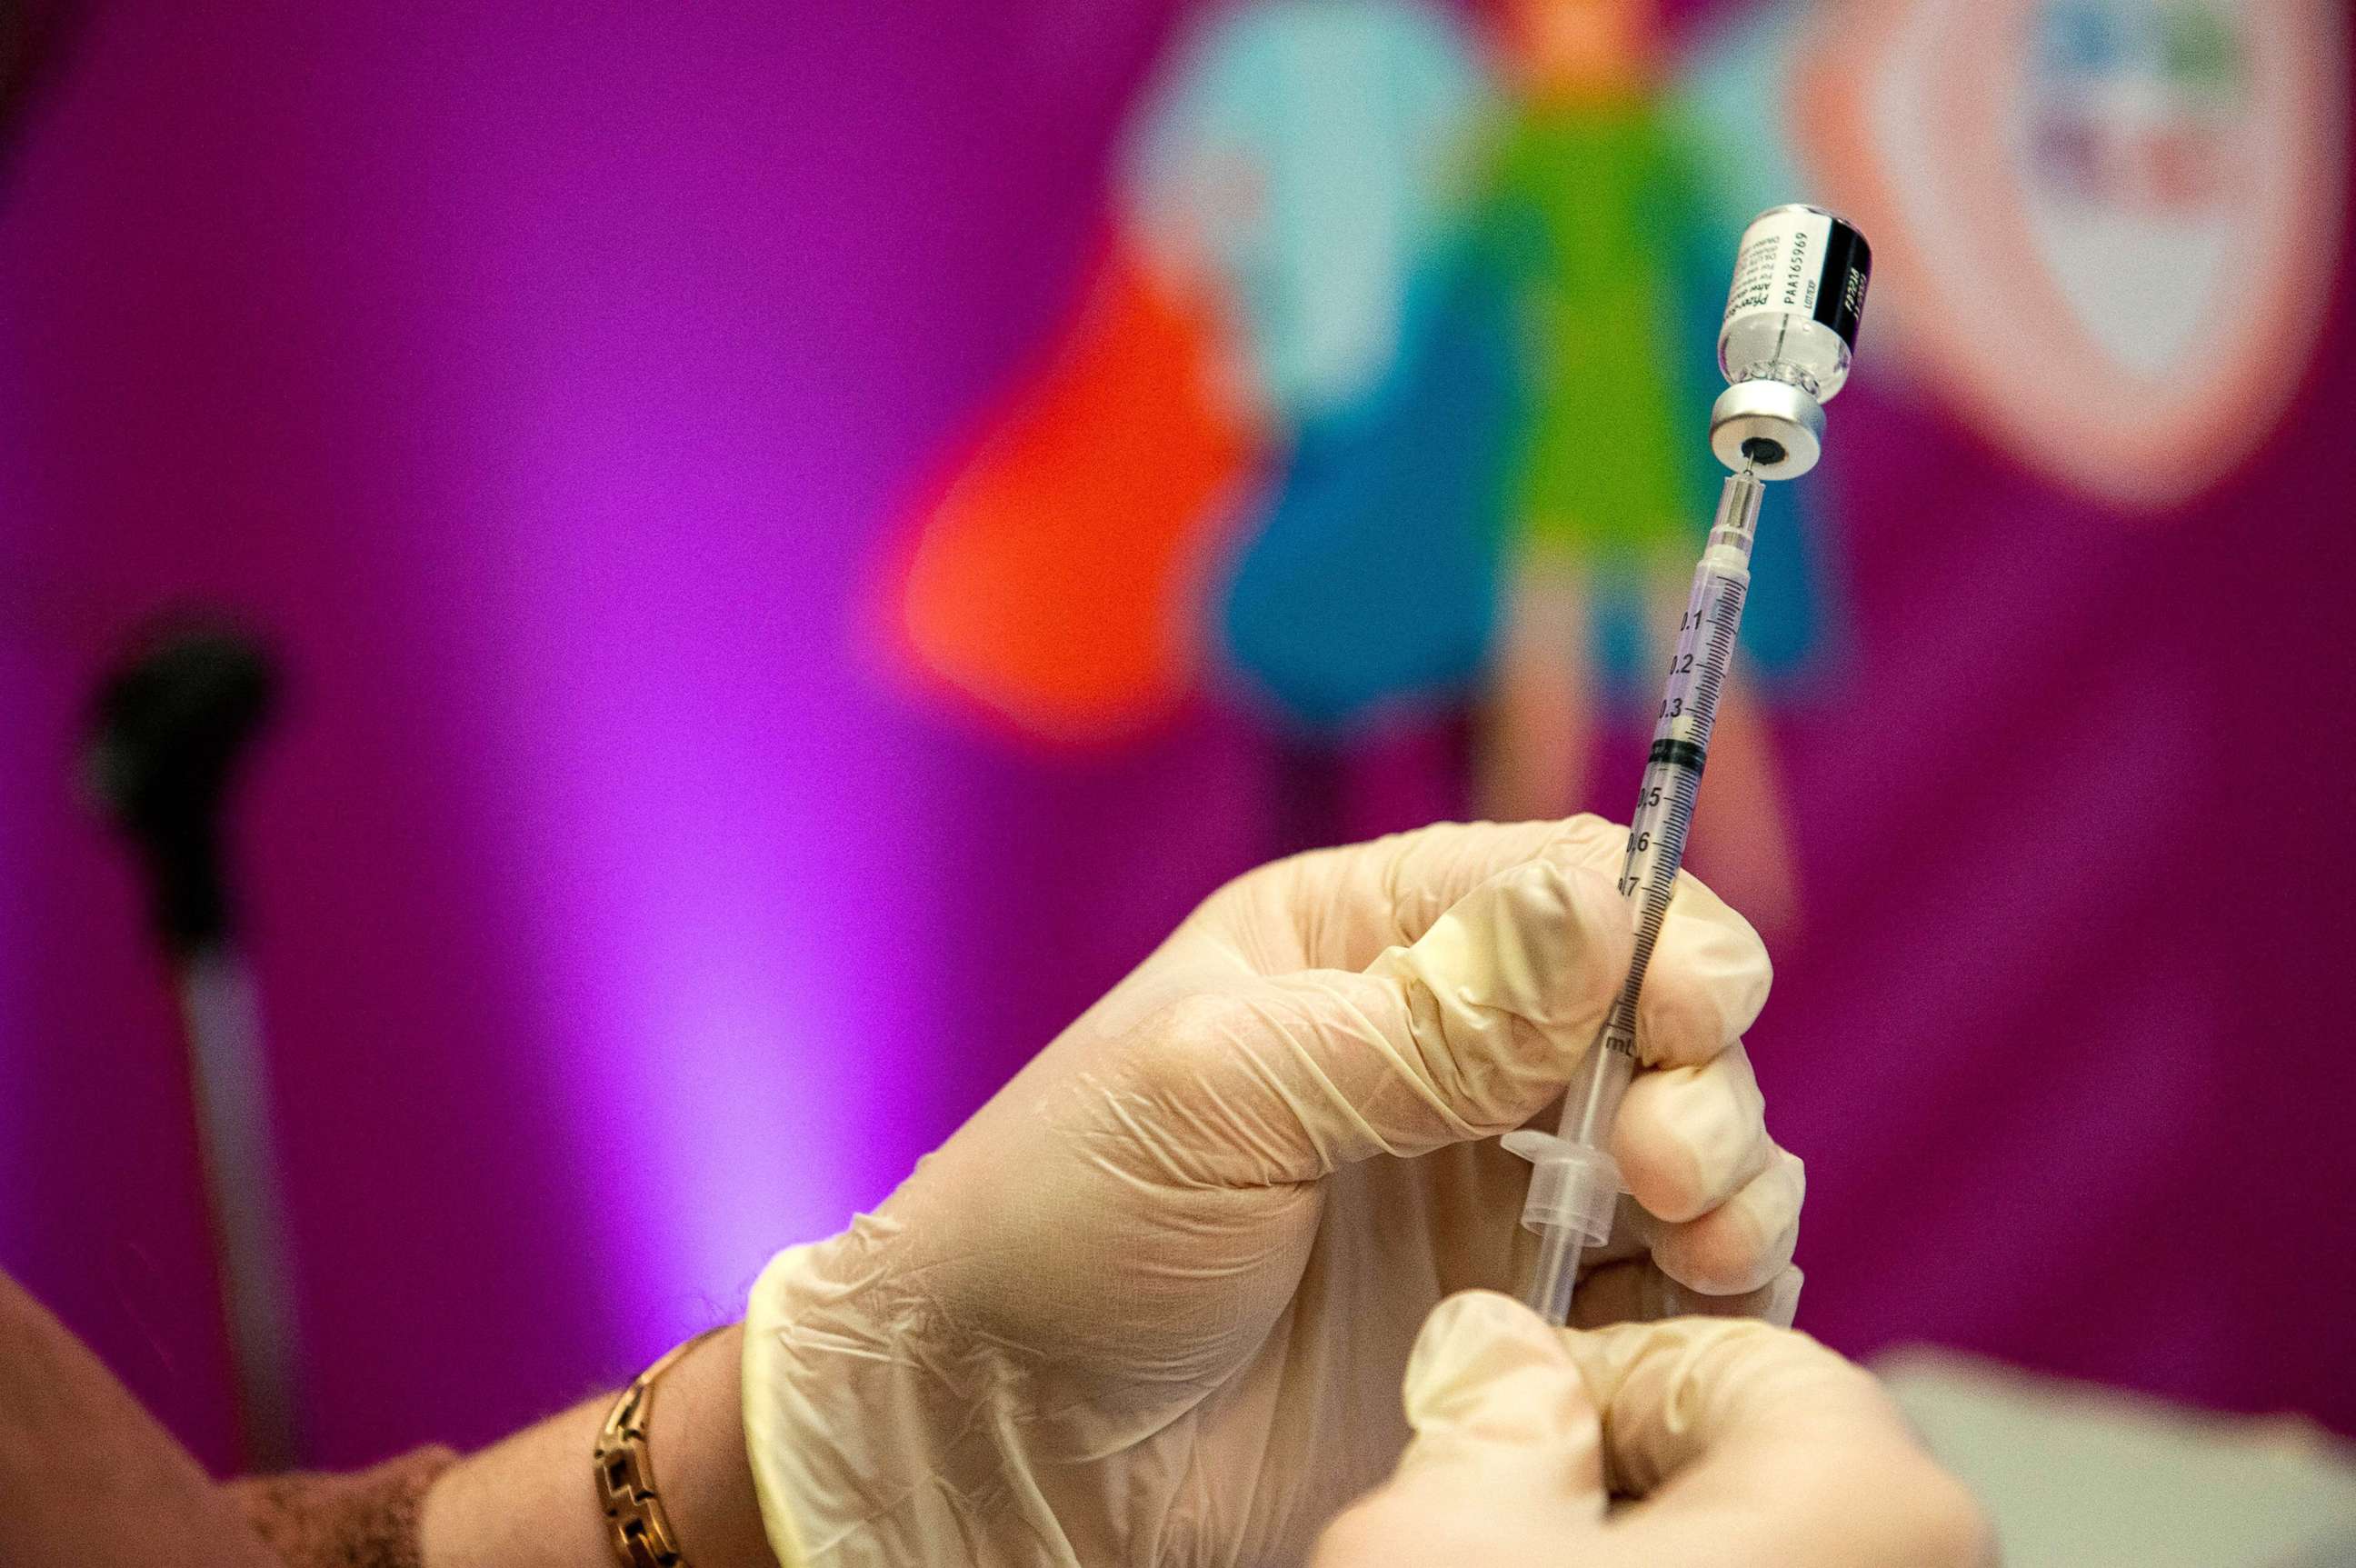 PHOTO: A medical worker prepares a Covid-19 vaccine booster at Hartford Hospital in Hartford, Conn., on Jan. 6, 2022.